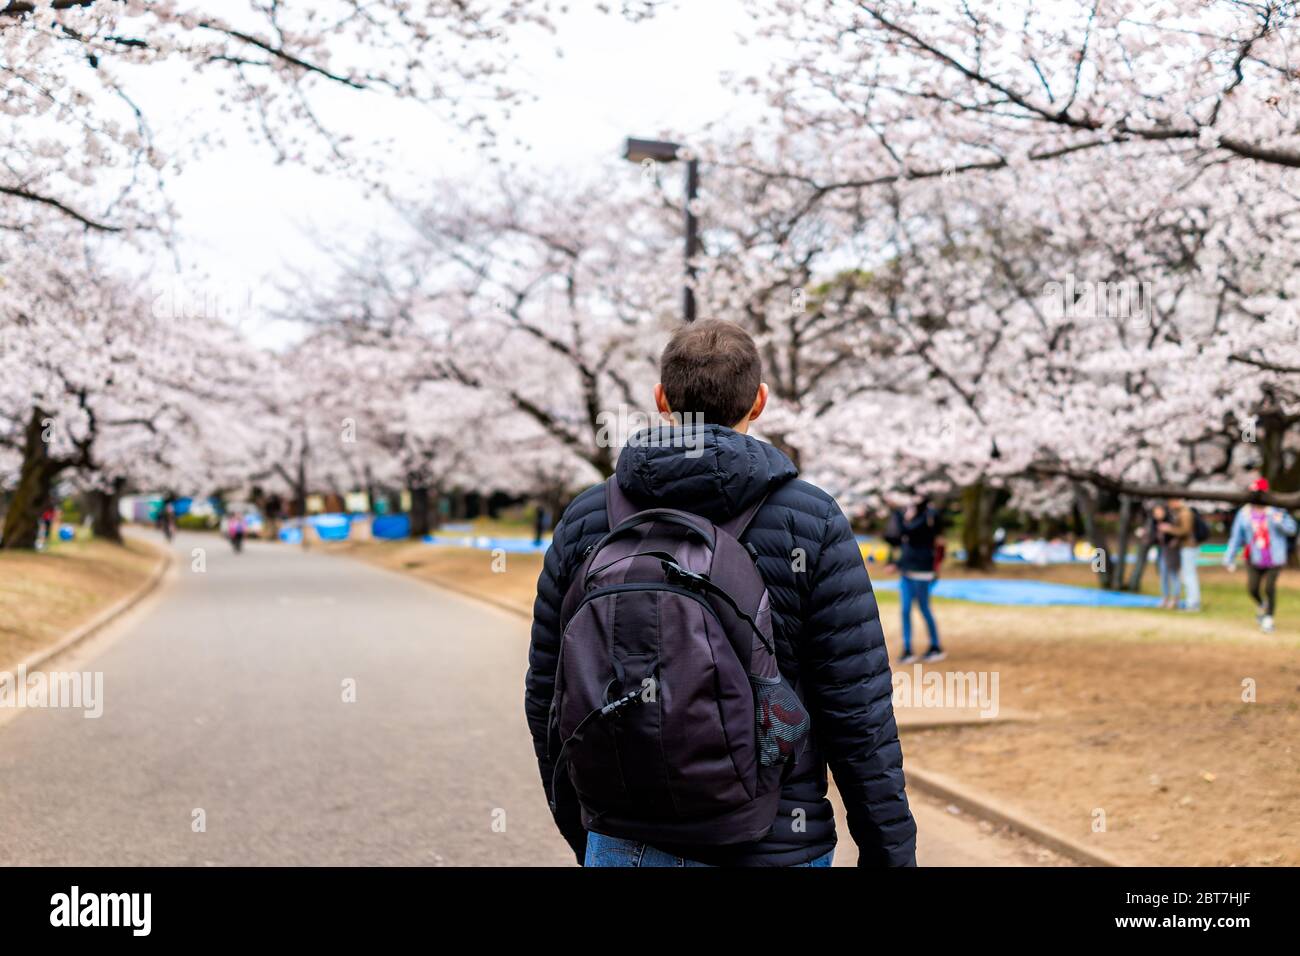 Tokyo, Japan Yoyogi park with back of one person tourist man walking on road street path by sakura flowers pink white cherry blossom trees Stock Photo